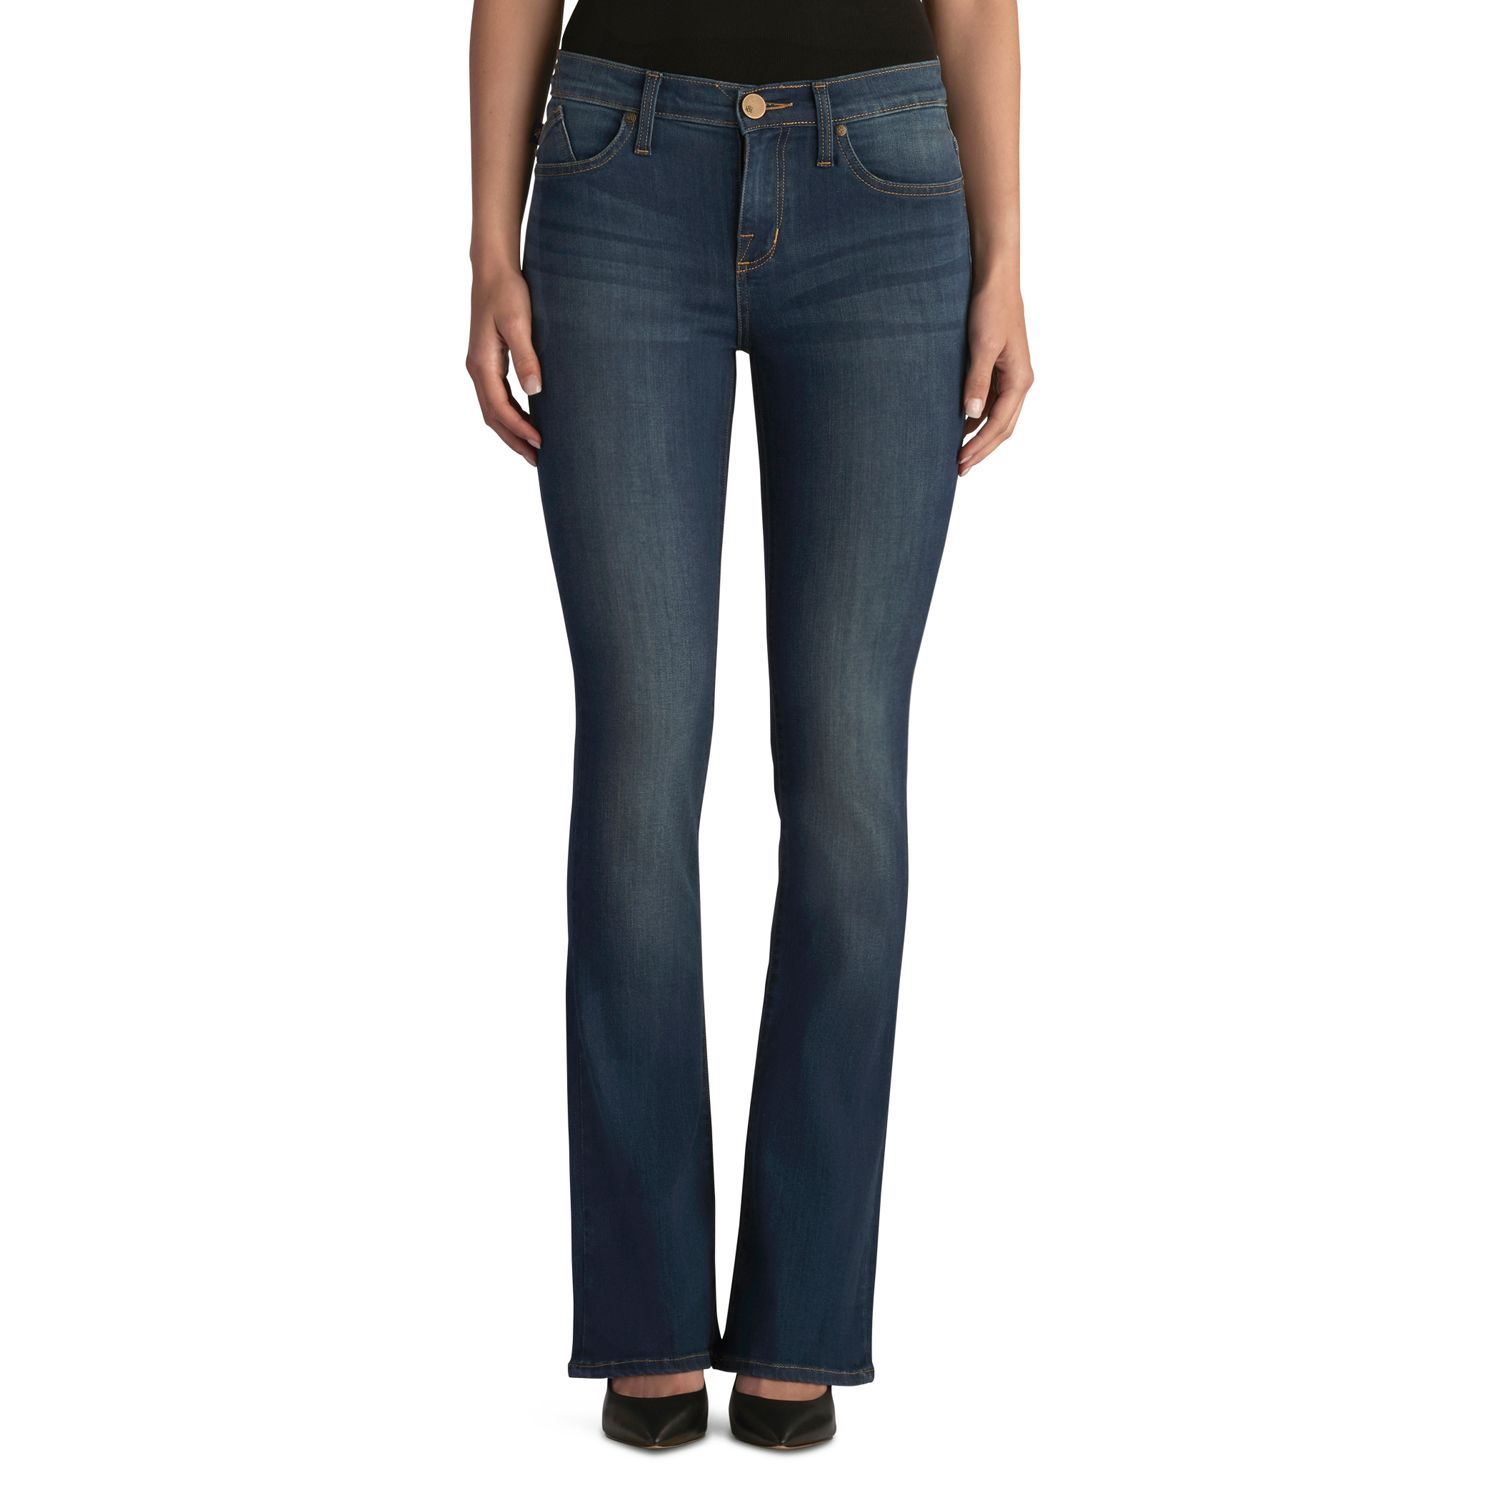 rock and republic flare jeans